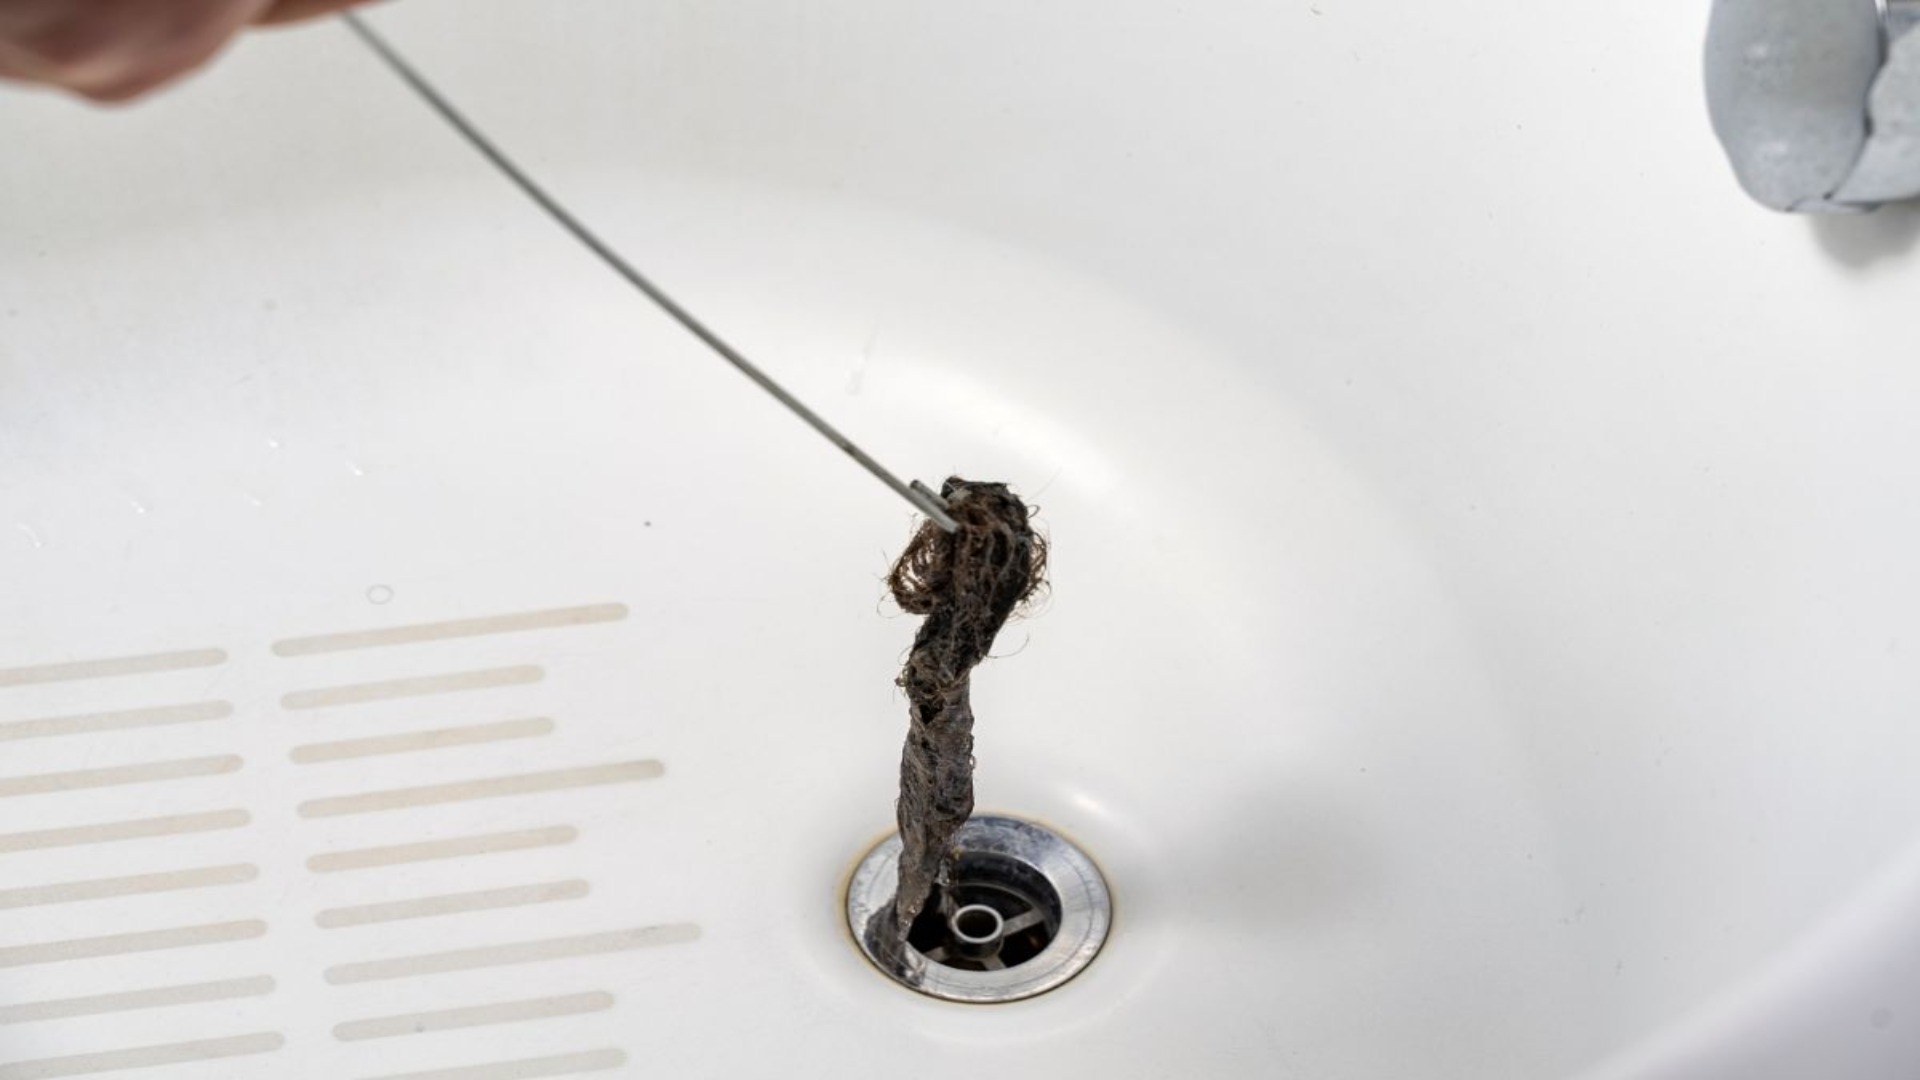 How To Unclog Bathroom Sink Clogged With Hair